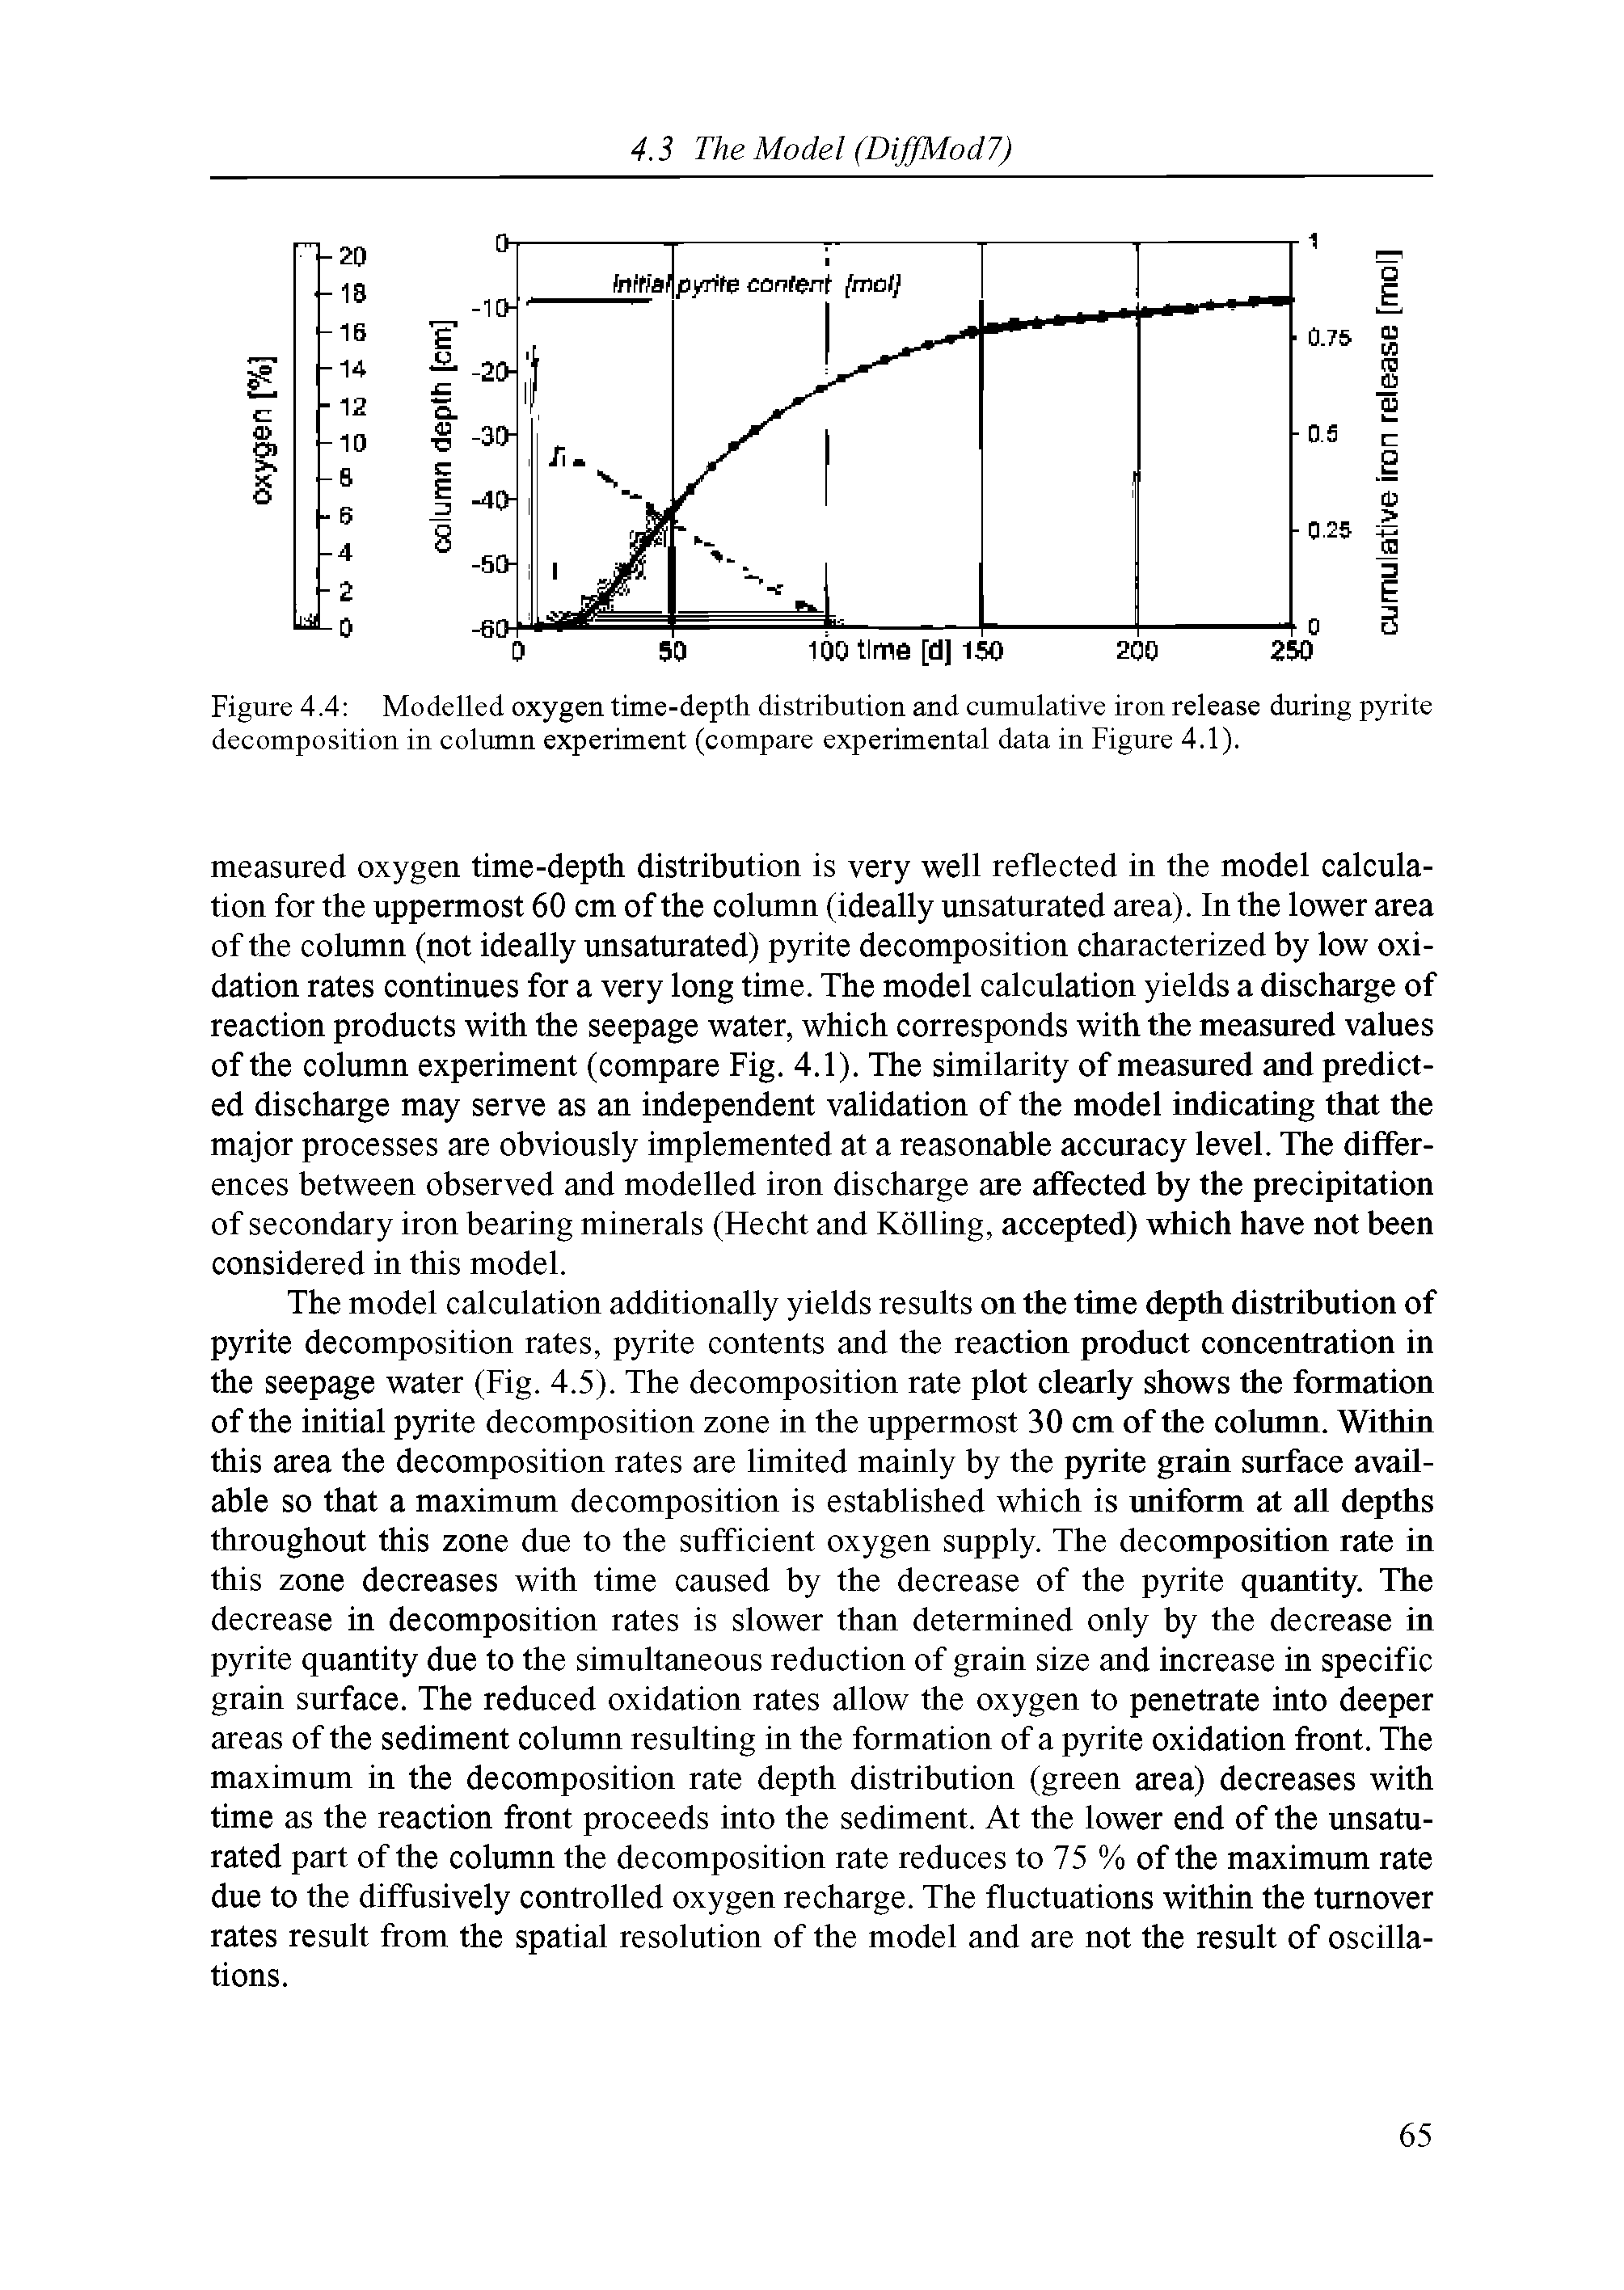 Figure 4.4 Modelled oxygen time-depth distribution and cumulative iron release during pyrite decomposition in column experiment (compare experimental data in Figure 4.1).